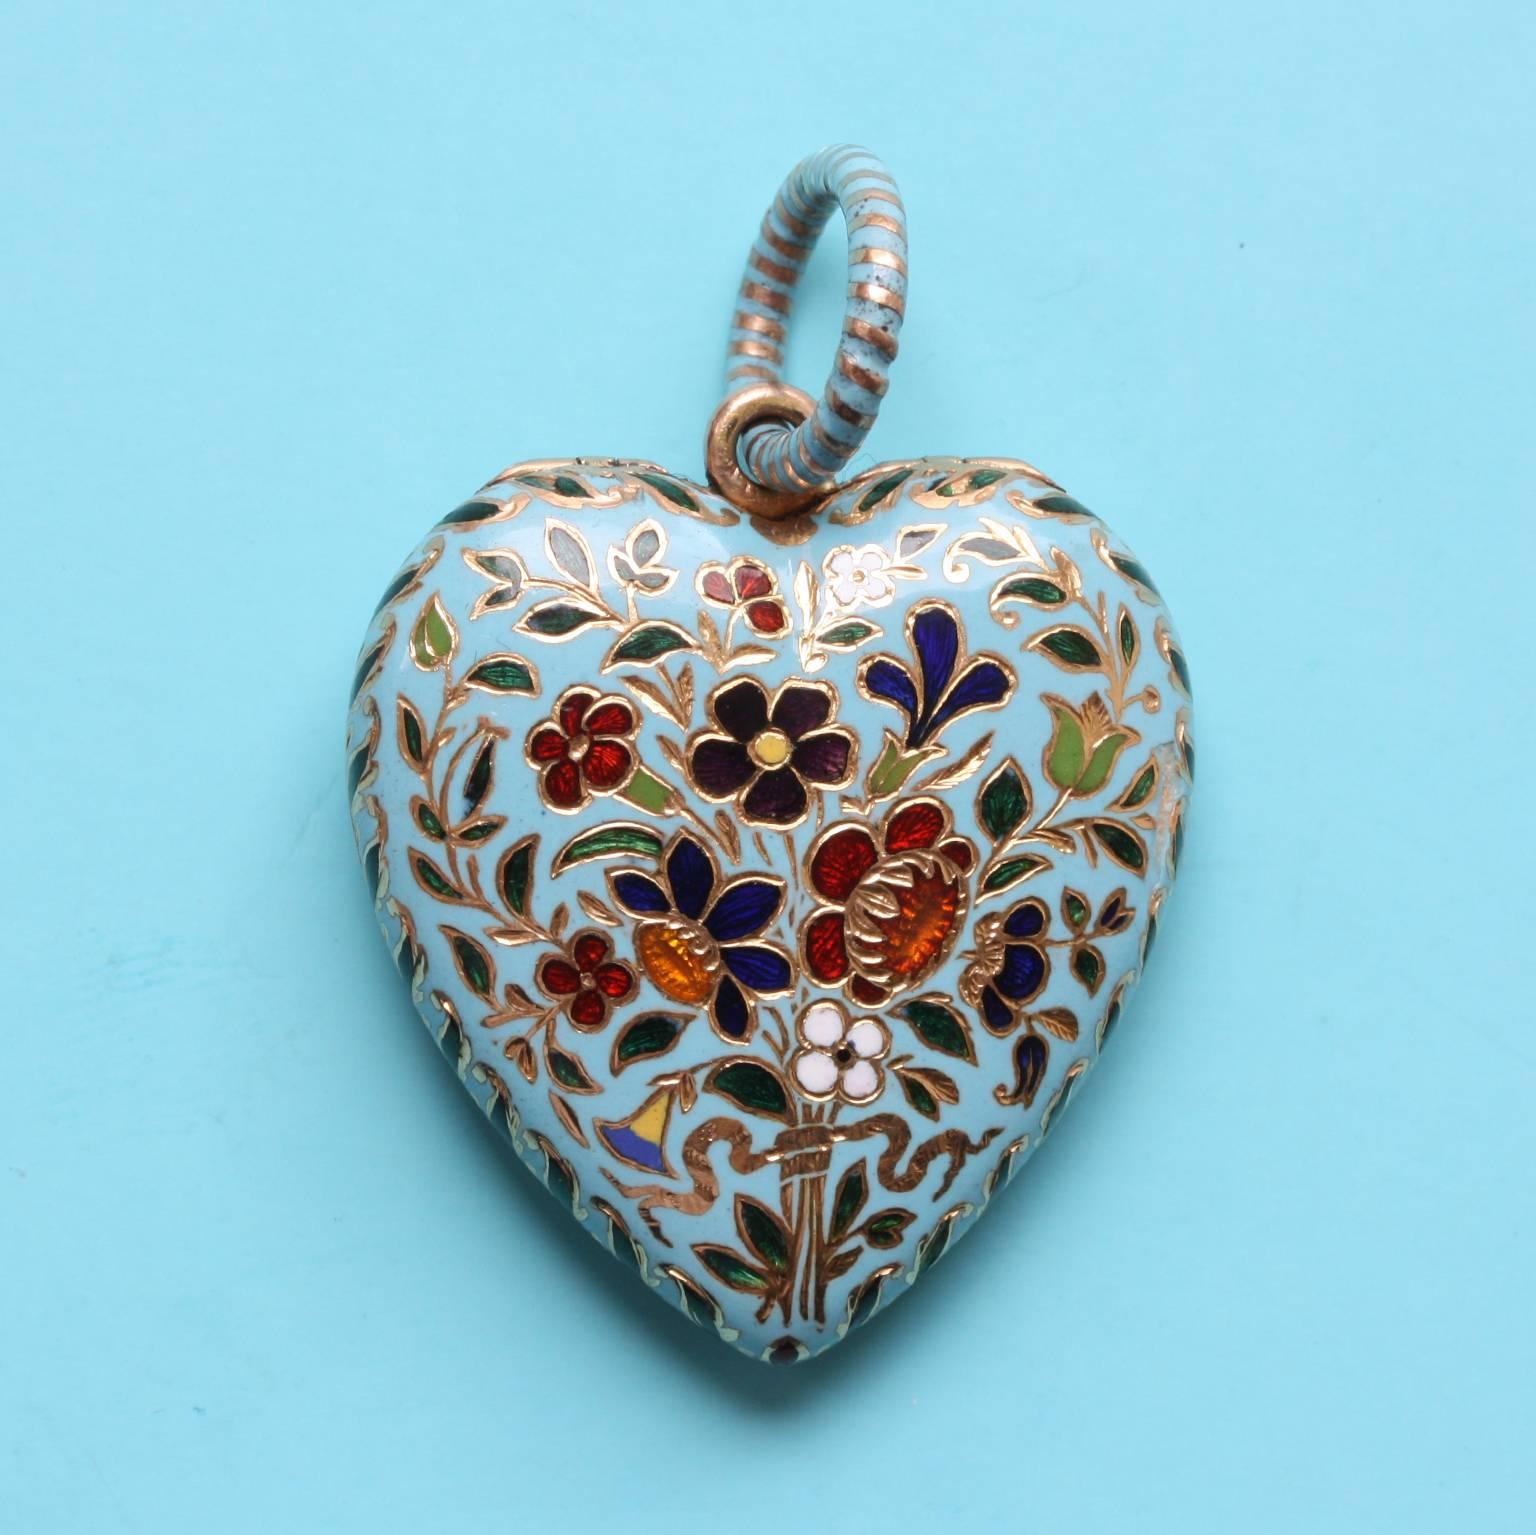 Aperfect 19 carat gold heart-shaped gold locket decorated with a colorful flower bouquet on a light blue background, a different bouquet on each side of the locket, suspending from a large hoop with a striped decoration in blue enamel and gold, the